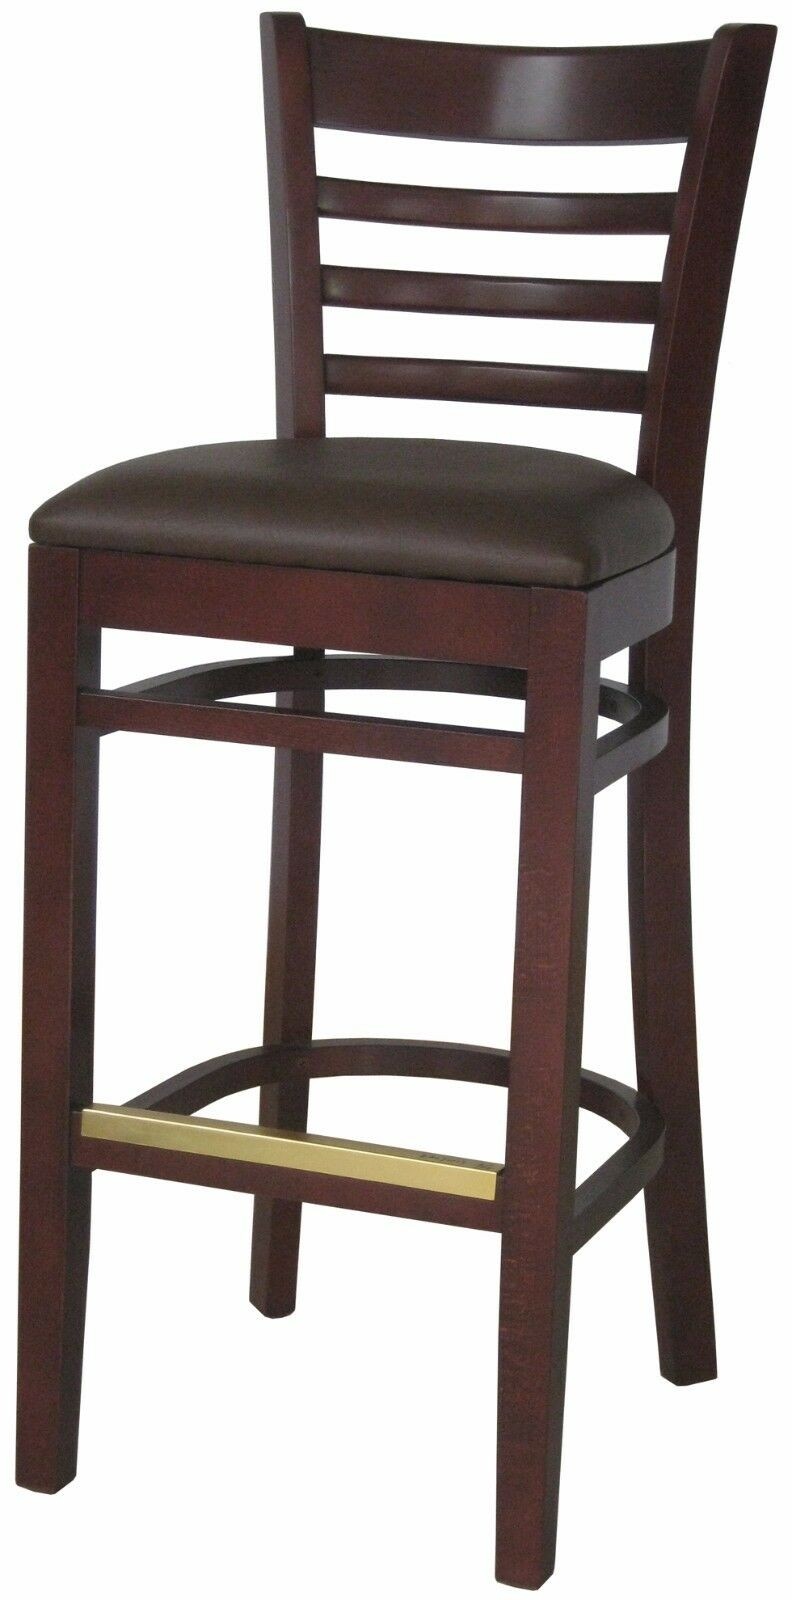 Wooden bar stools with backs 2